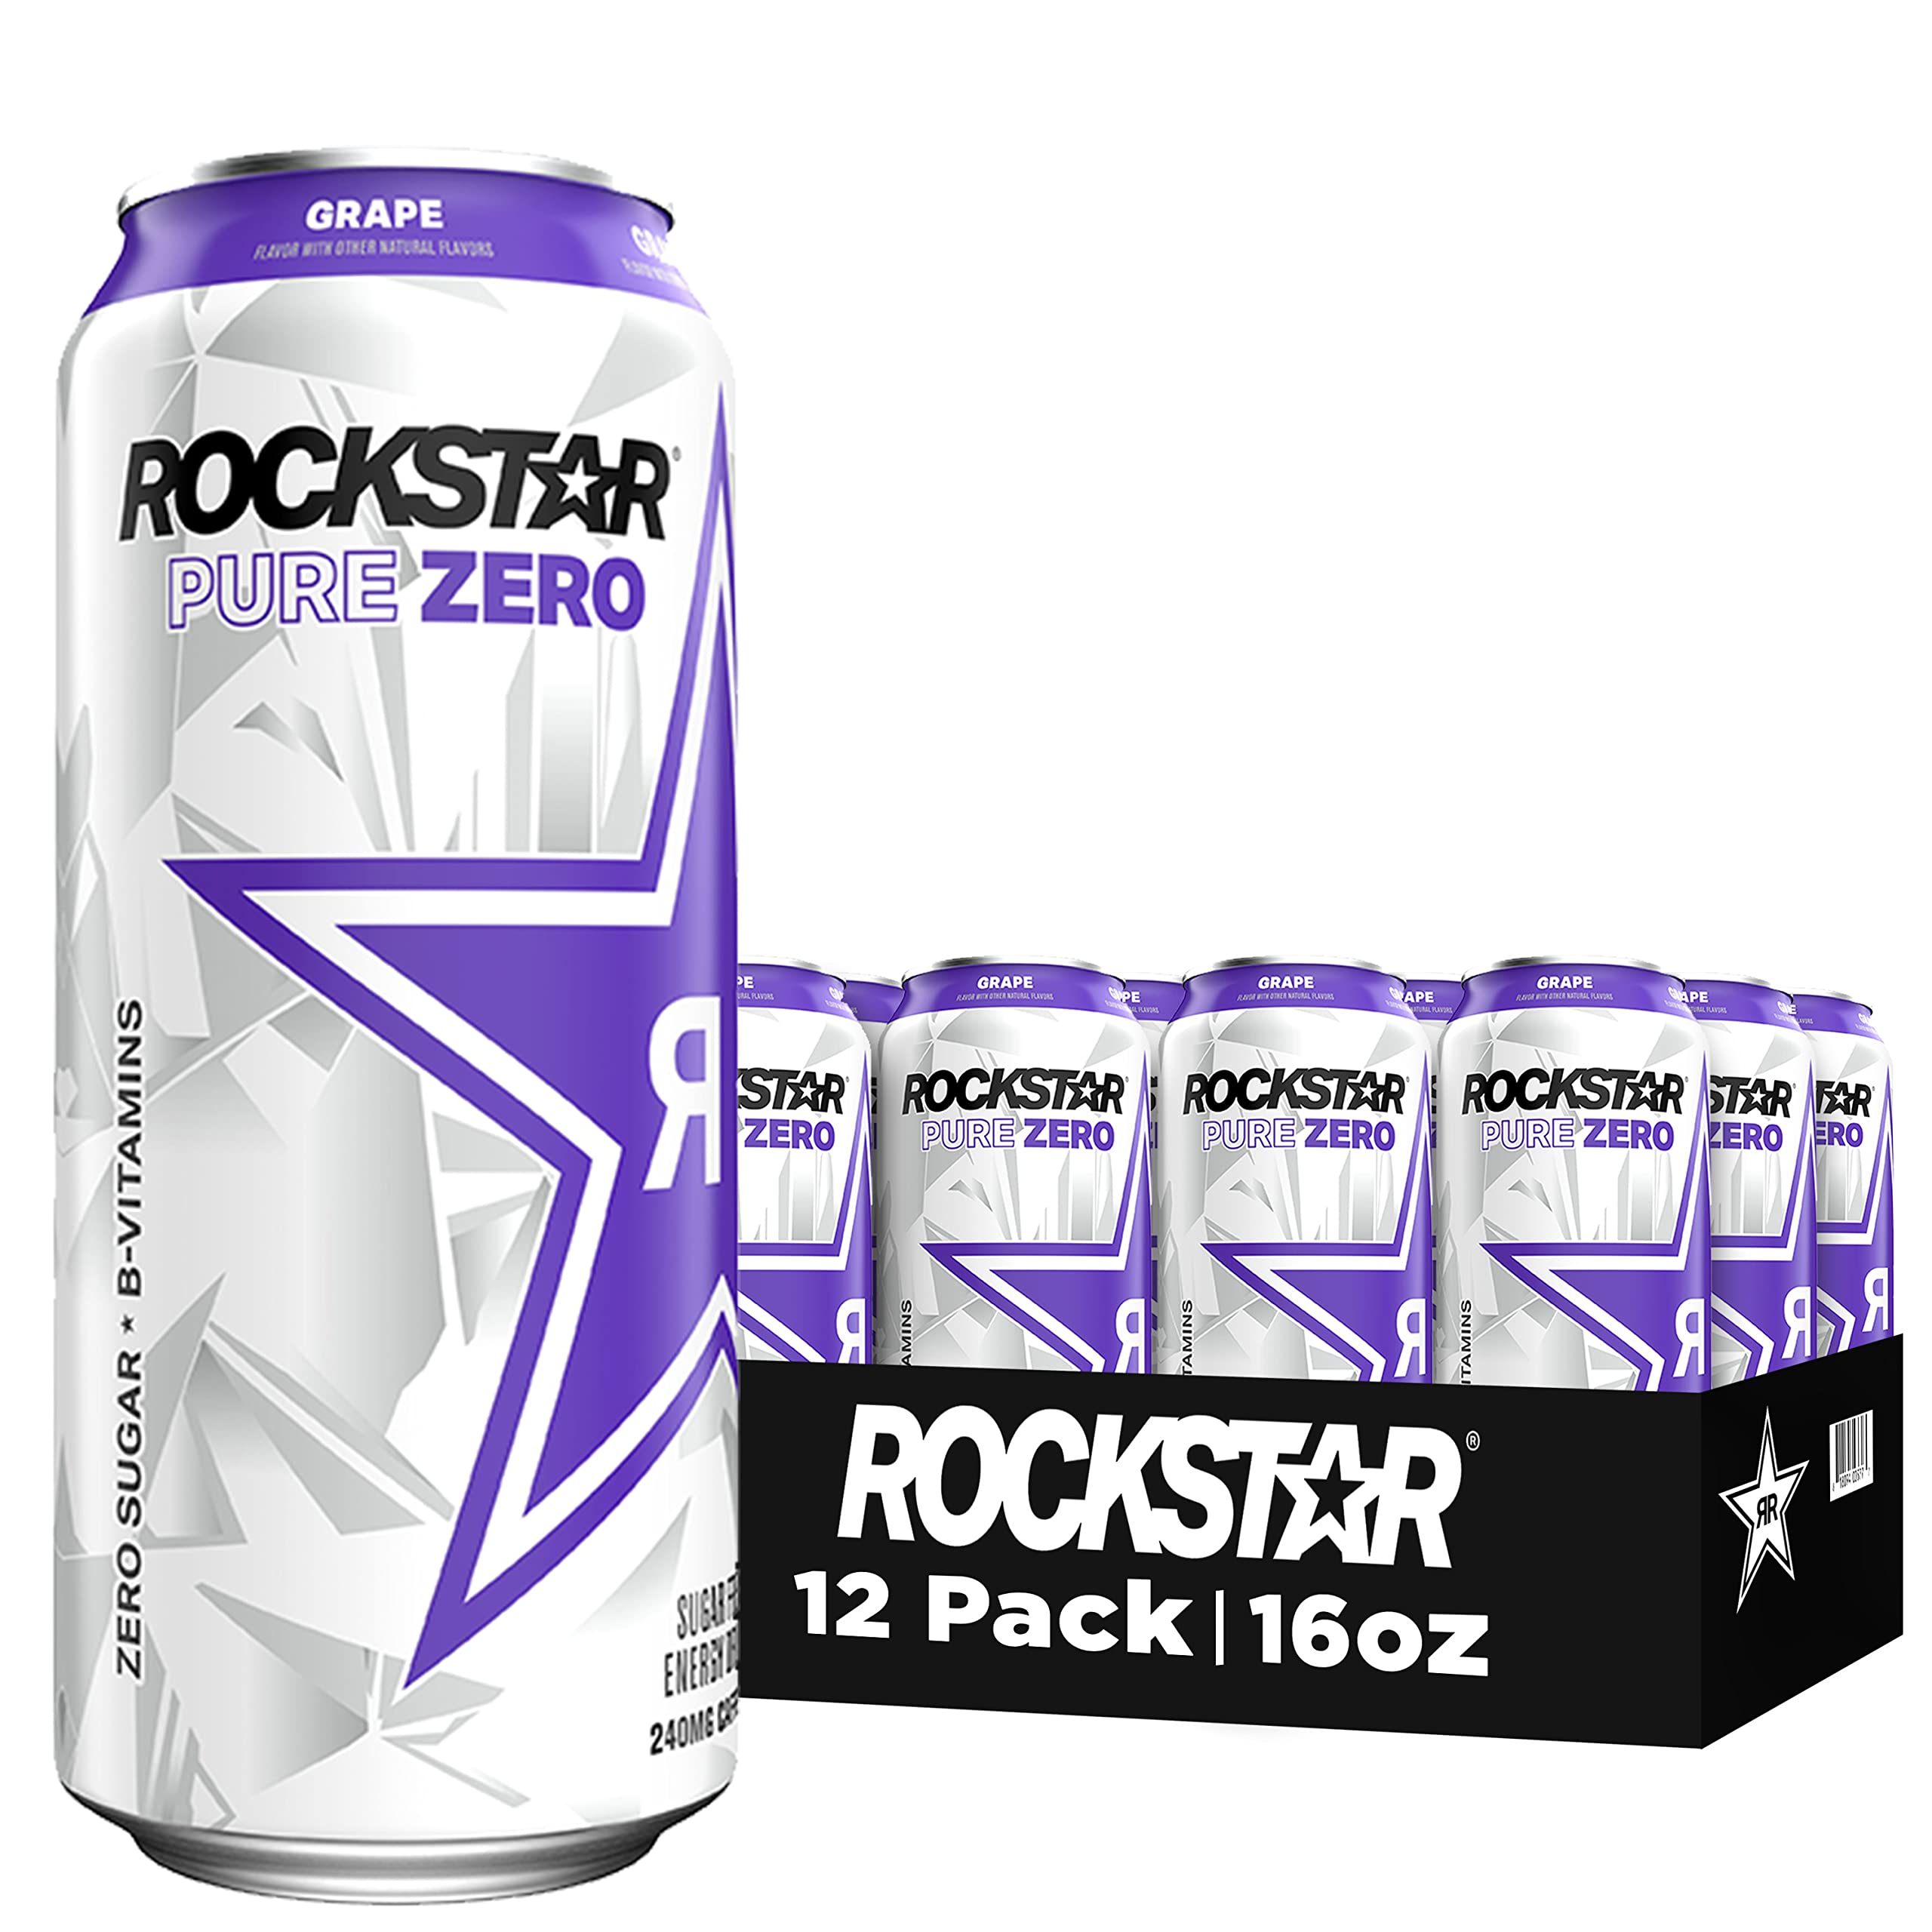 12-Pack 16-Oz Rockstar Pure Zero Energy Drink w/ Caffeine and Taurine (Grape or Variety Pack) from $15.34 w/ S&S + Free Shipping w/ Prime or on $35+